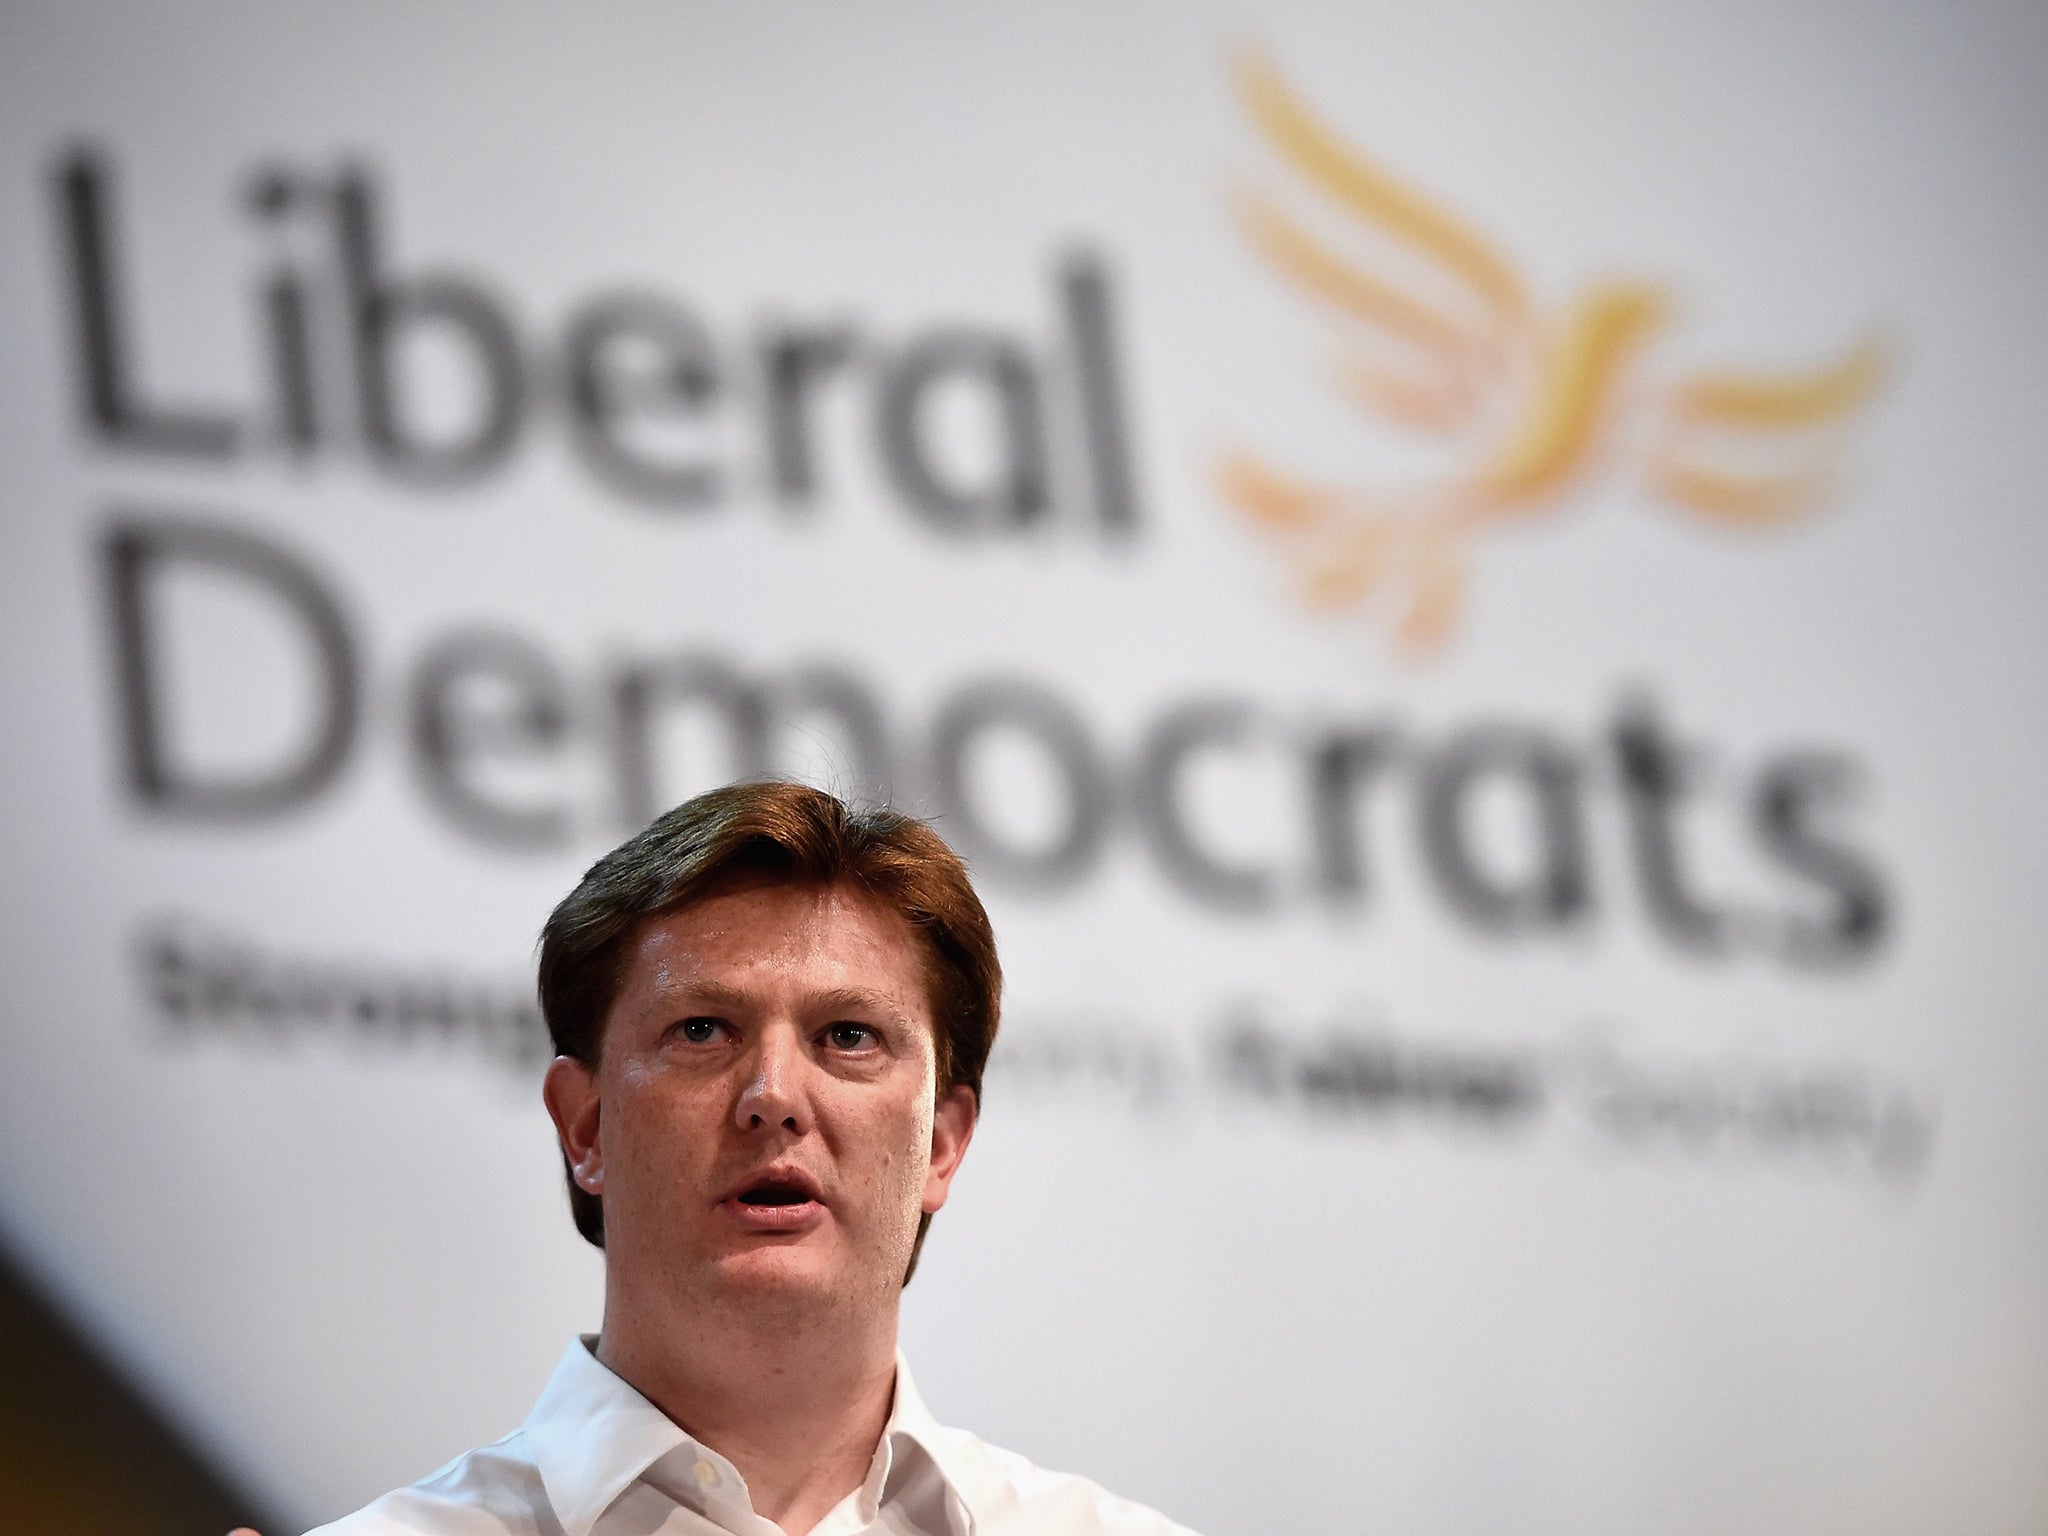 Danny Alexander has worked closely with Chancellor George Osborne during his time as Chief Secretary to the Treasury